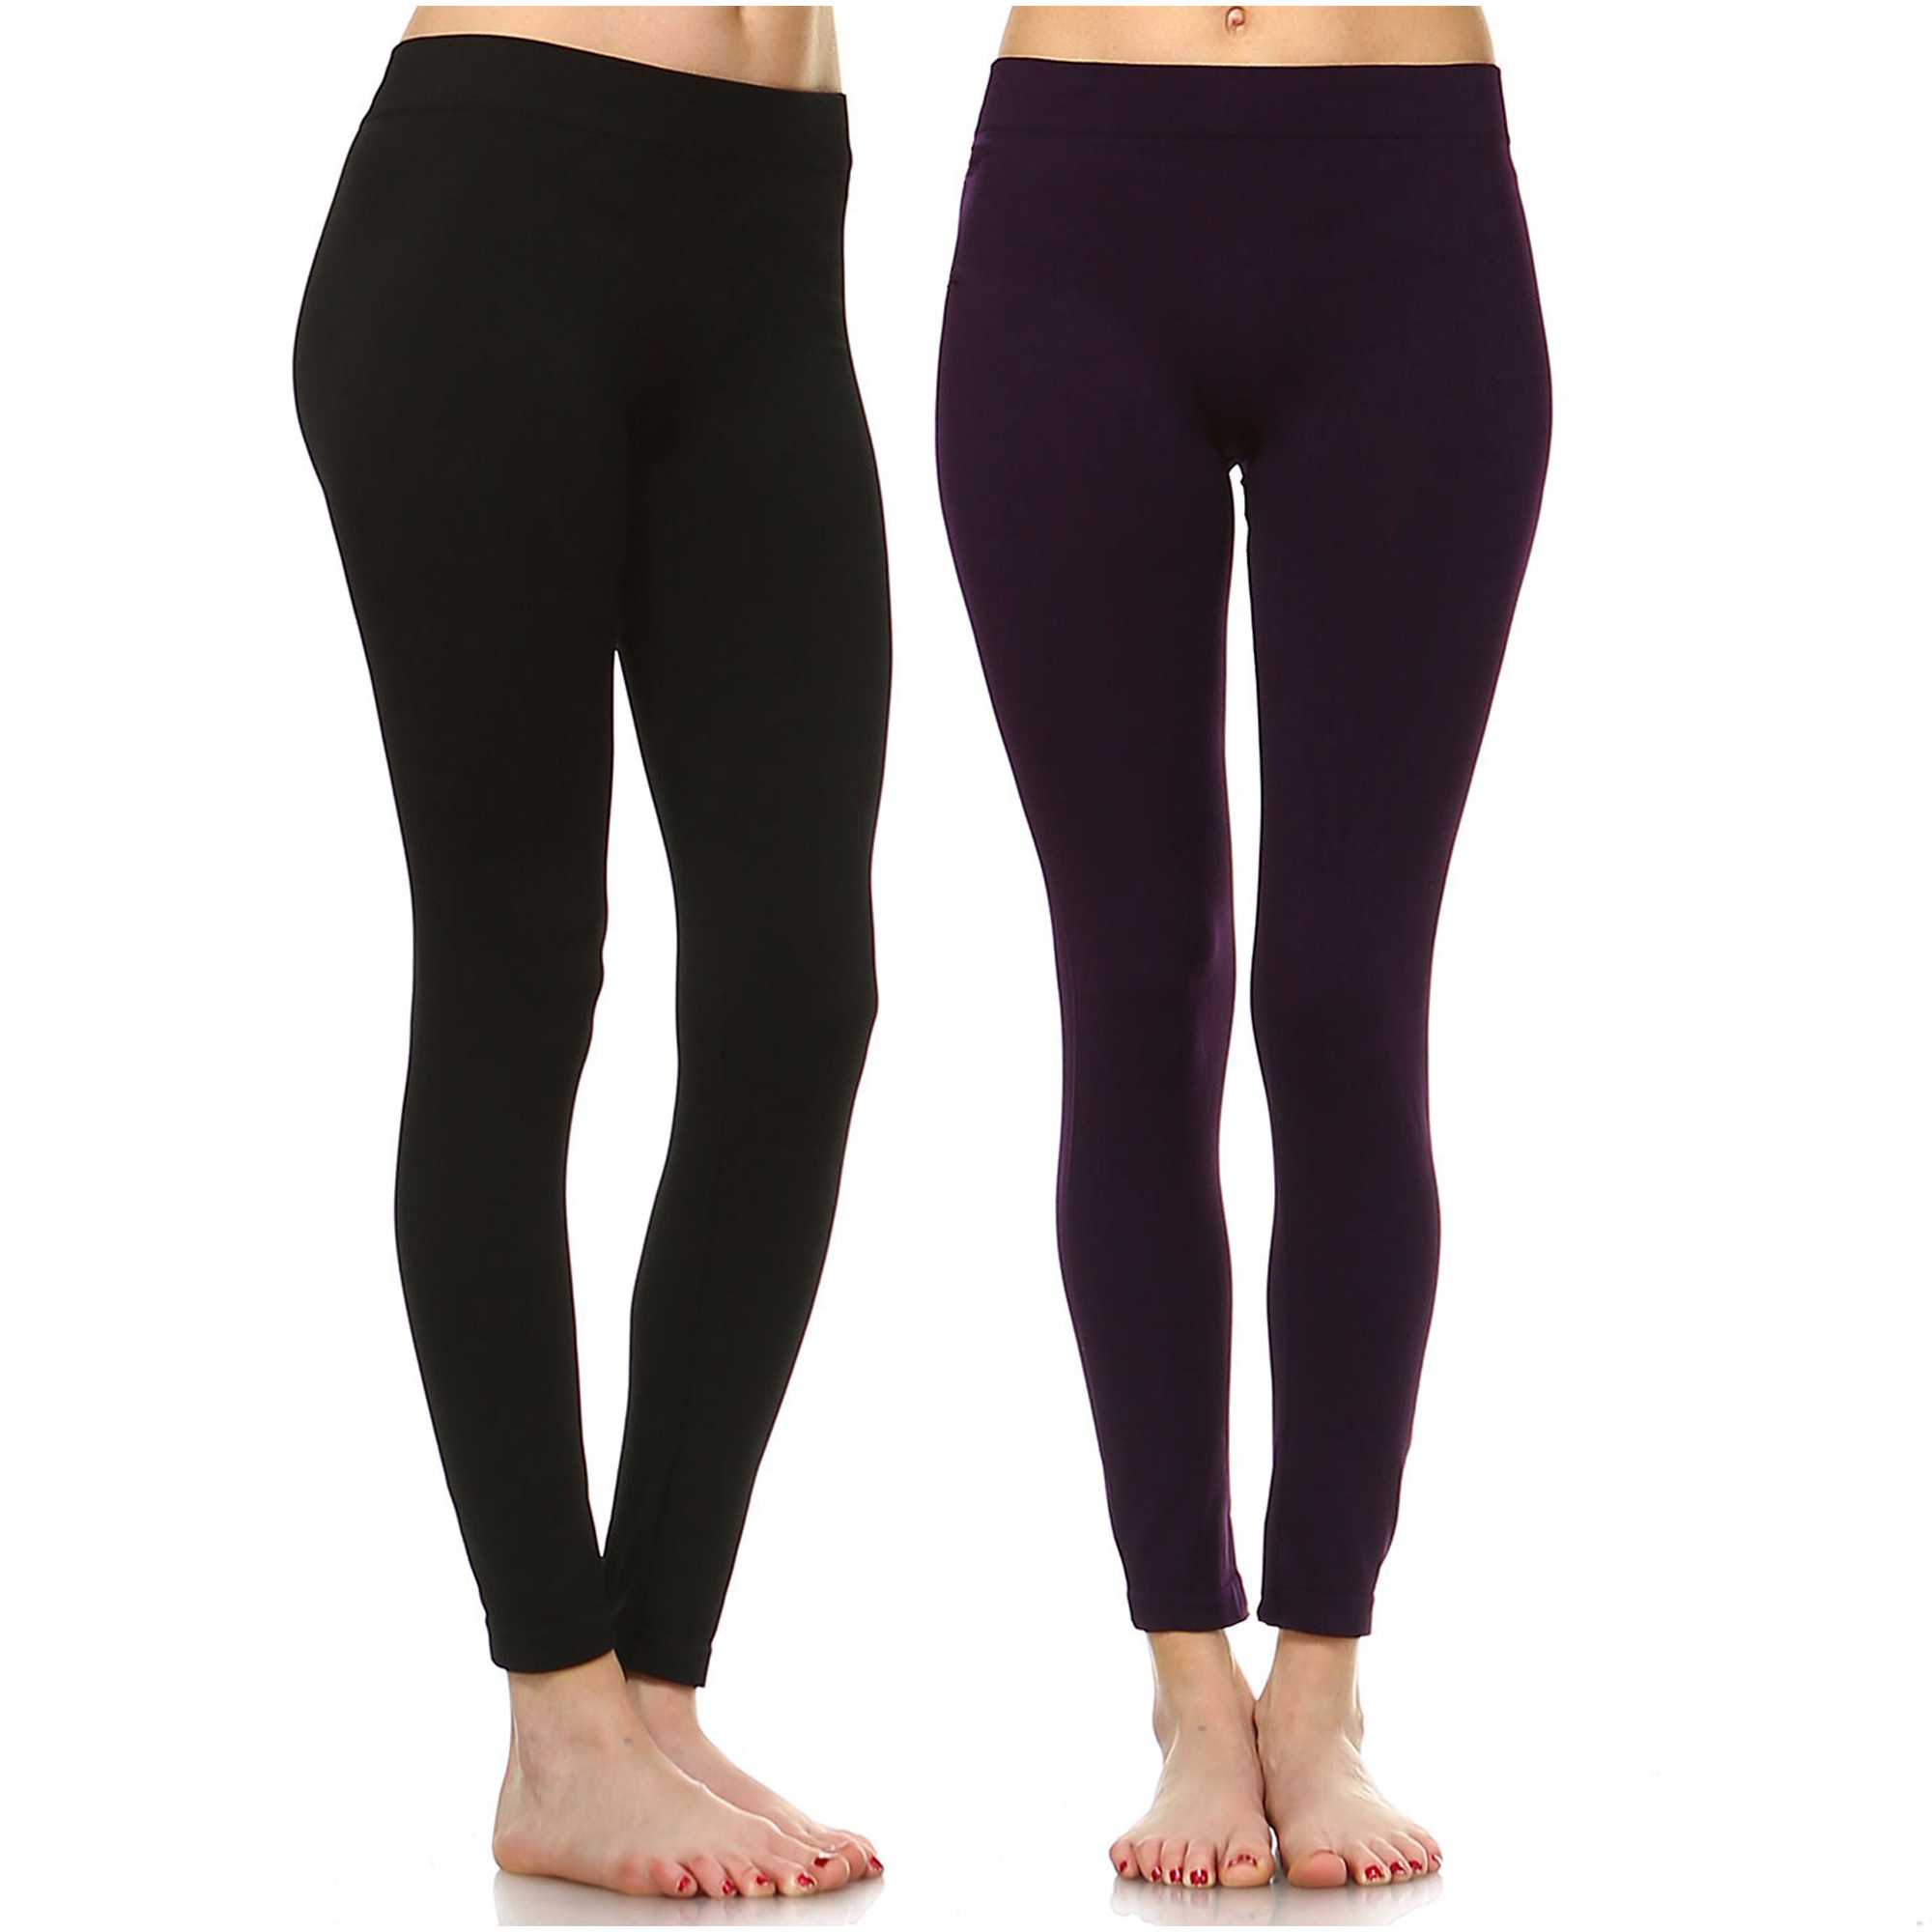 White Mark Women's Pack Of 2 Solid Color Leggings - Black, Purple, One Size - Missy